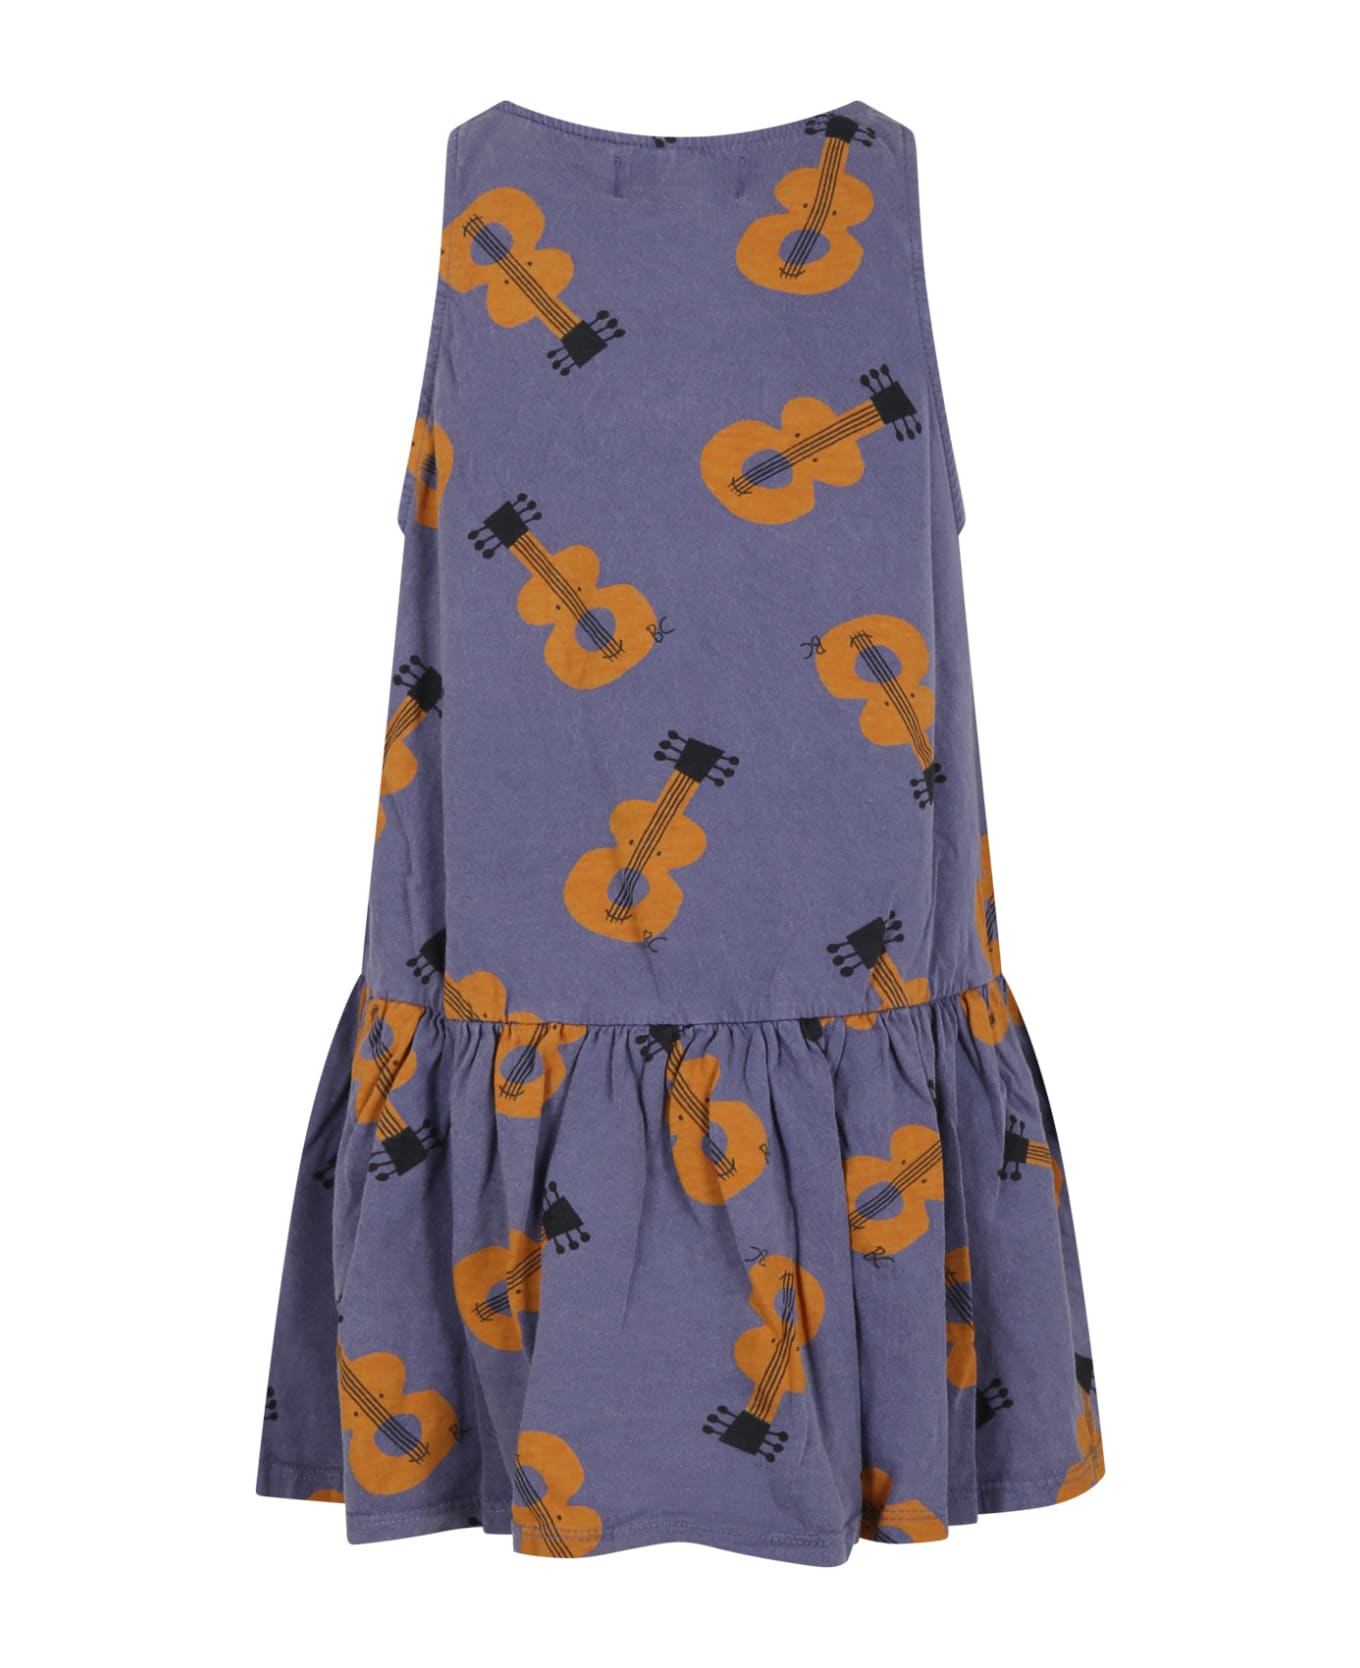 Bobo Choses Purple Dress For Girl With Guitars - Violet